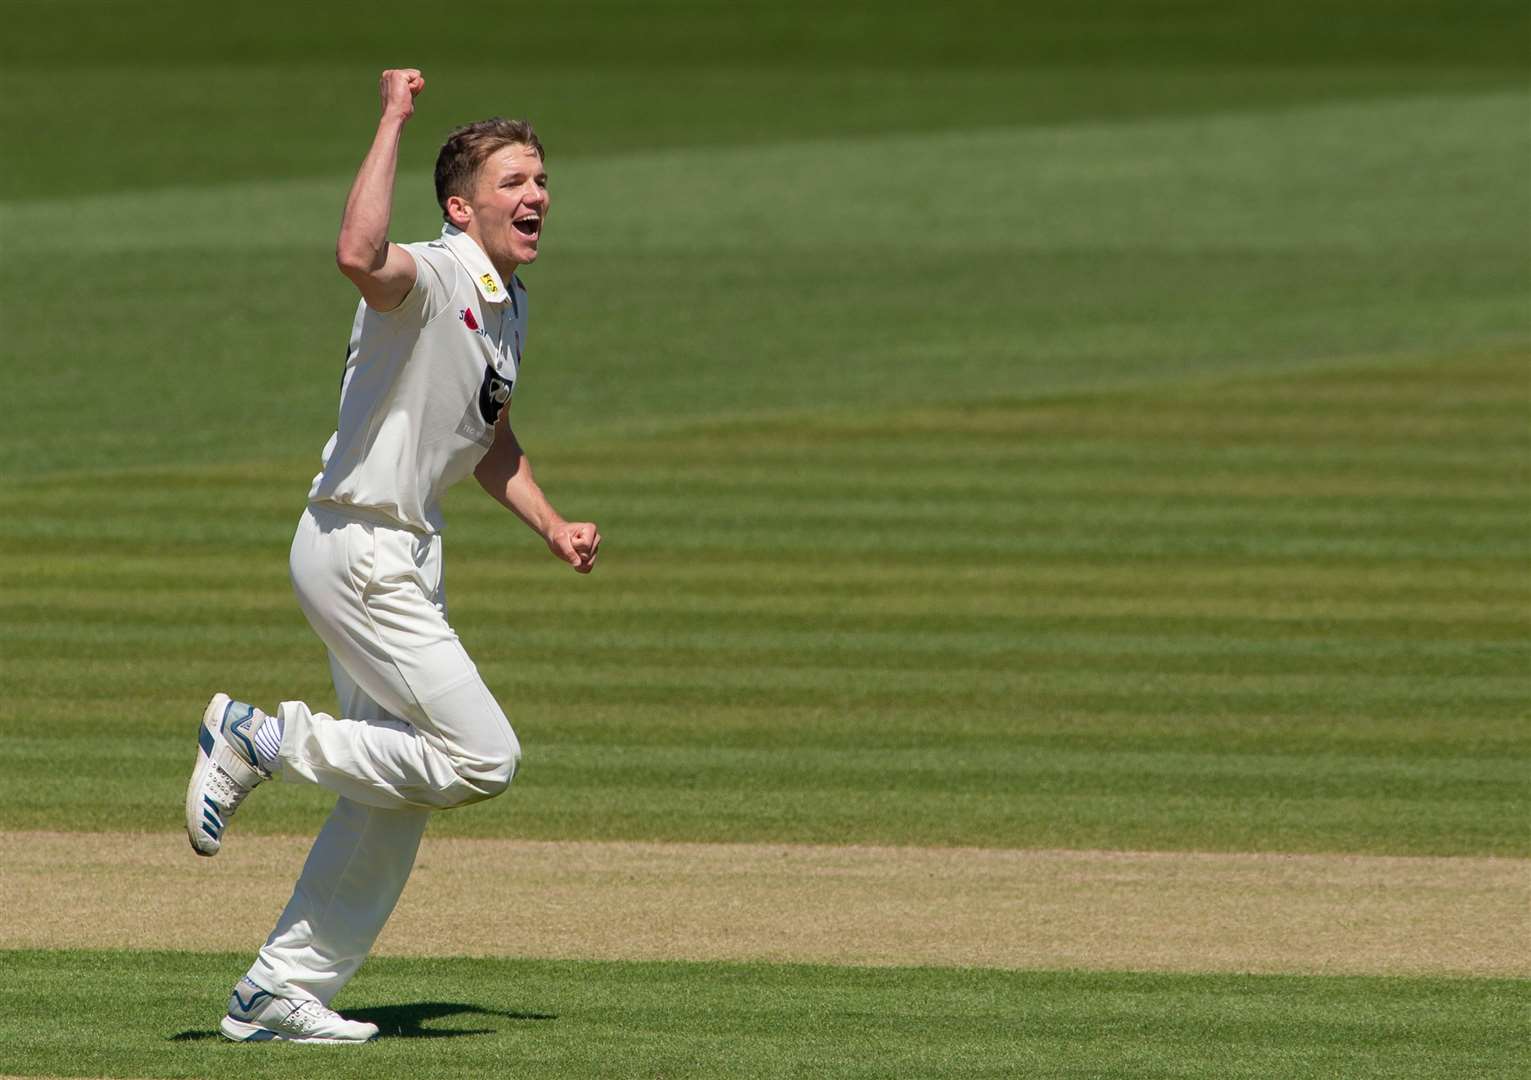 Kent's Matt Milnes celebrates taking the wicket of Yorkshire's Tom Kohler-Cadmore earlier this season. Picture: Ady Kerry